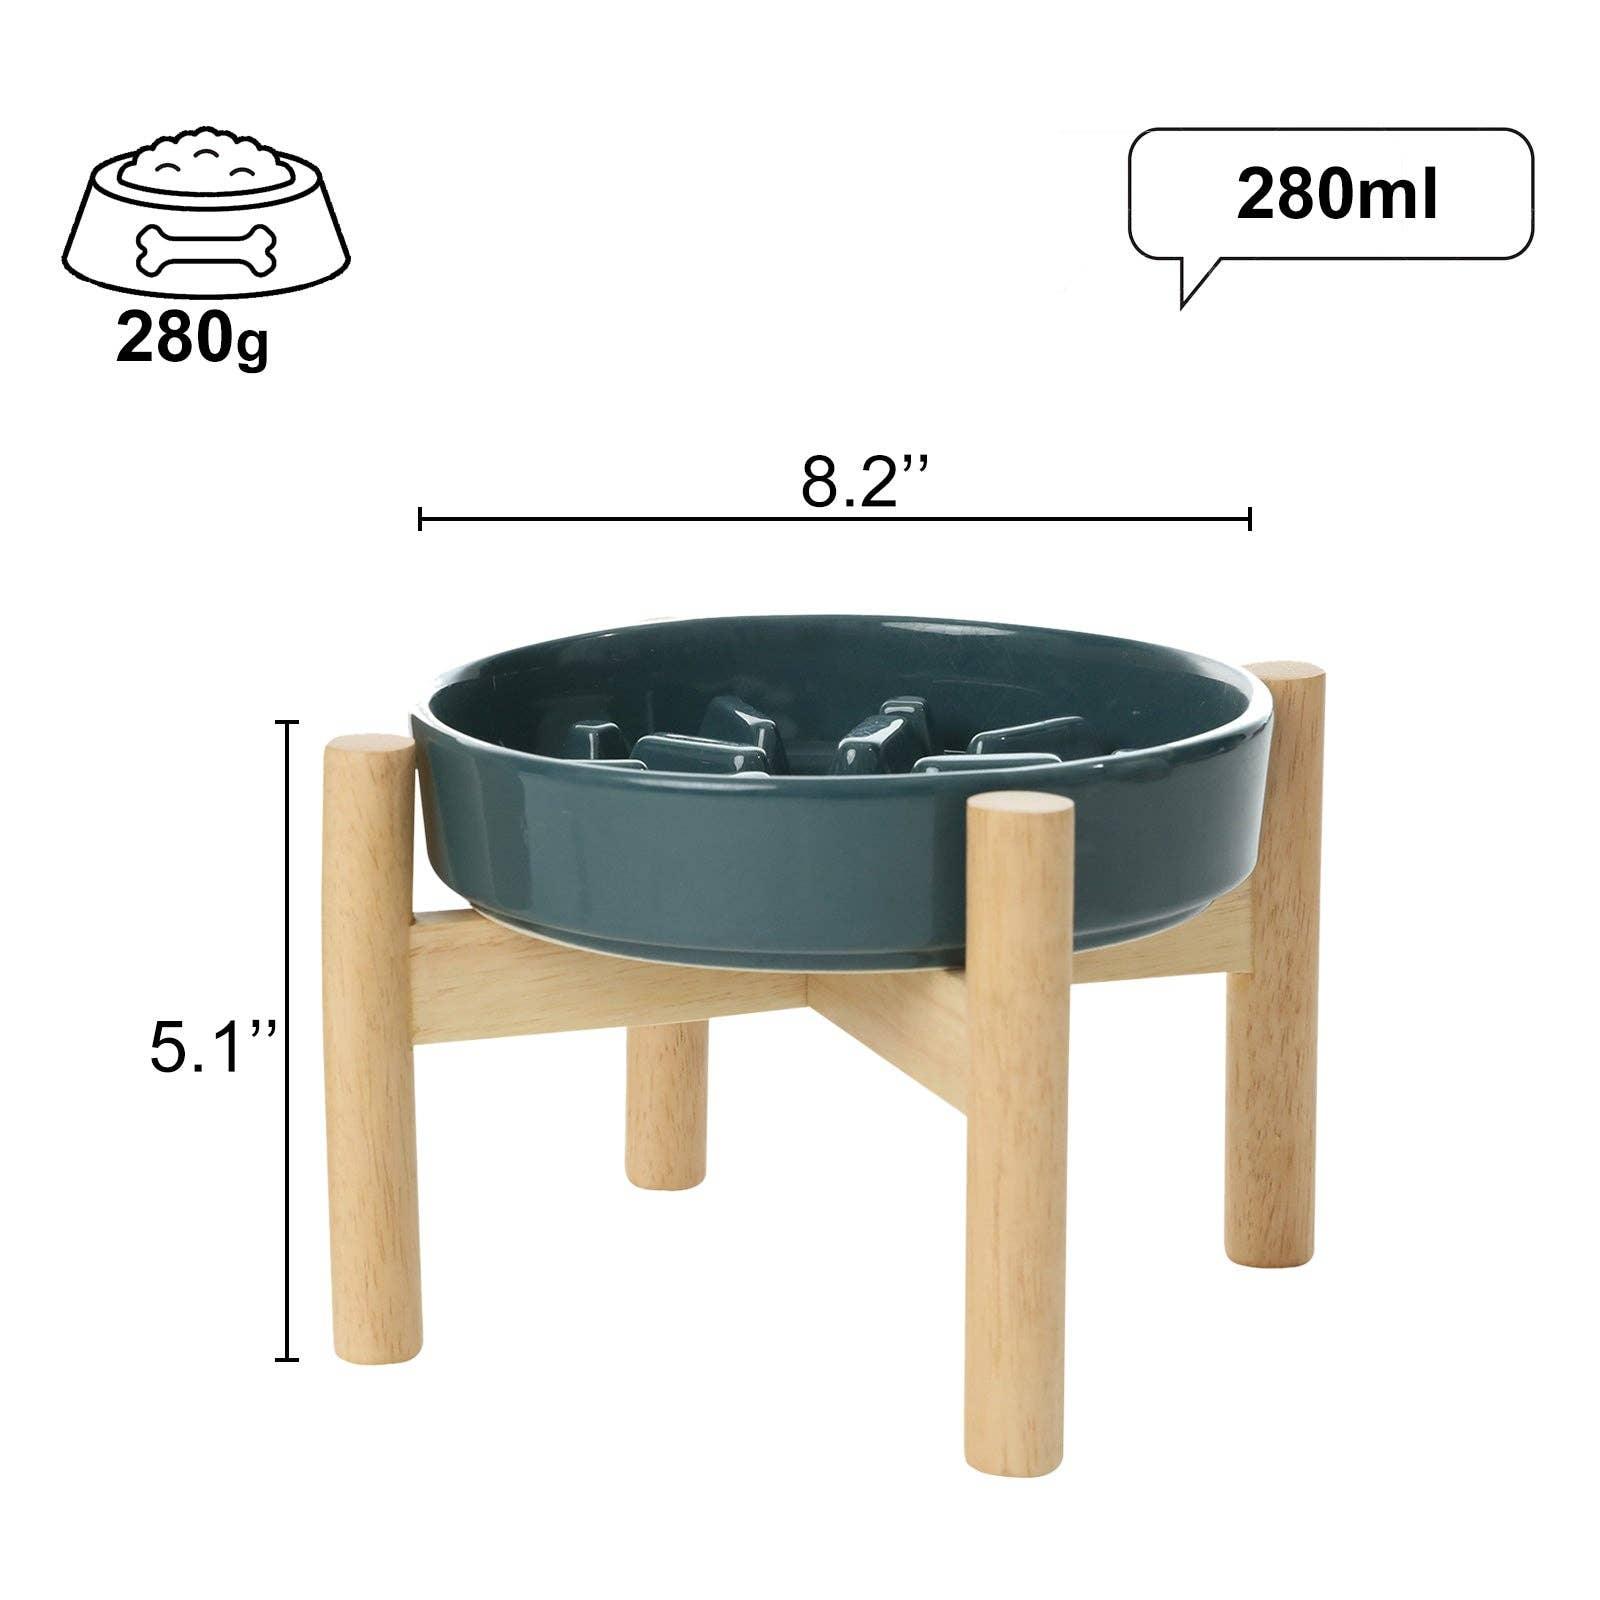 [Wave] Slow Feeder Dog Bowls - M / Pink / Wood Stand - Rocky & Maggie's Pet Boutique and Salon